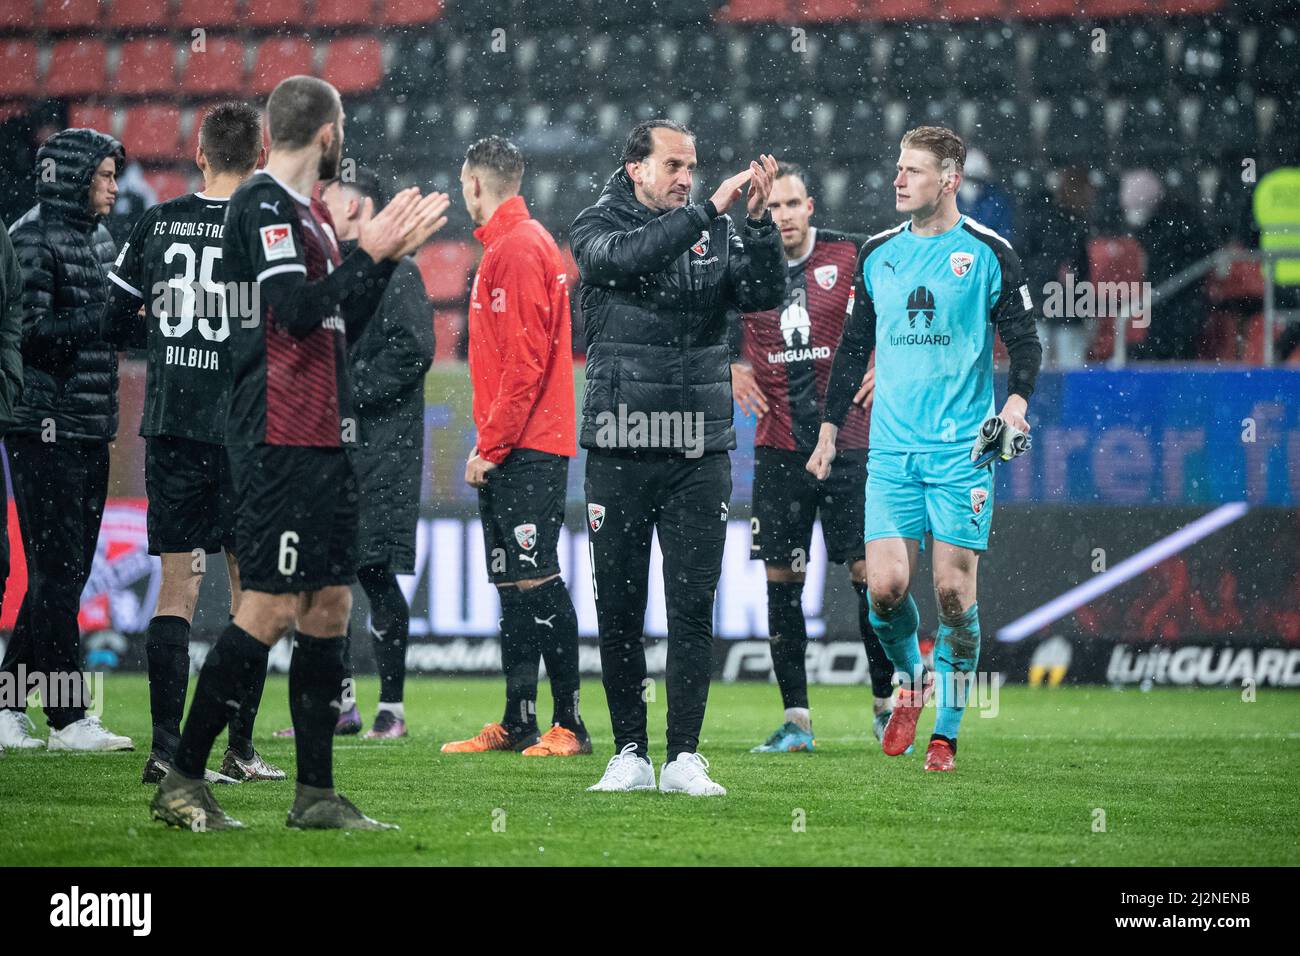 Ingolstadt, Germany. 01st Apr, 2022. Soccer: 2nd Bundesliga, FC Ingolstadt 04 - Erzgebirge Aue, Matchday 28, Audi Sportpark. Ingolstadt coach Rüdiger Rehm (2nd from right) thanks the fans after the game. Credit: Matthias Balk/dpa - IMPORTANT NOTE: In accordance with the requirements of the DFL Deutsche Fußball Liga and the DFB Deutscher Fußball-Bund, it is prohibited to use or have used photographs taken in the stadium and/or of the match in the form of sequence pictures and/or video-like photo series./dpa/Alamy Live News Stock Photo